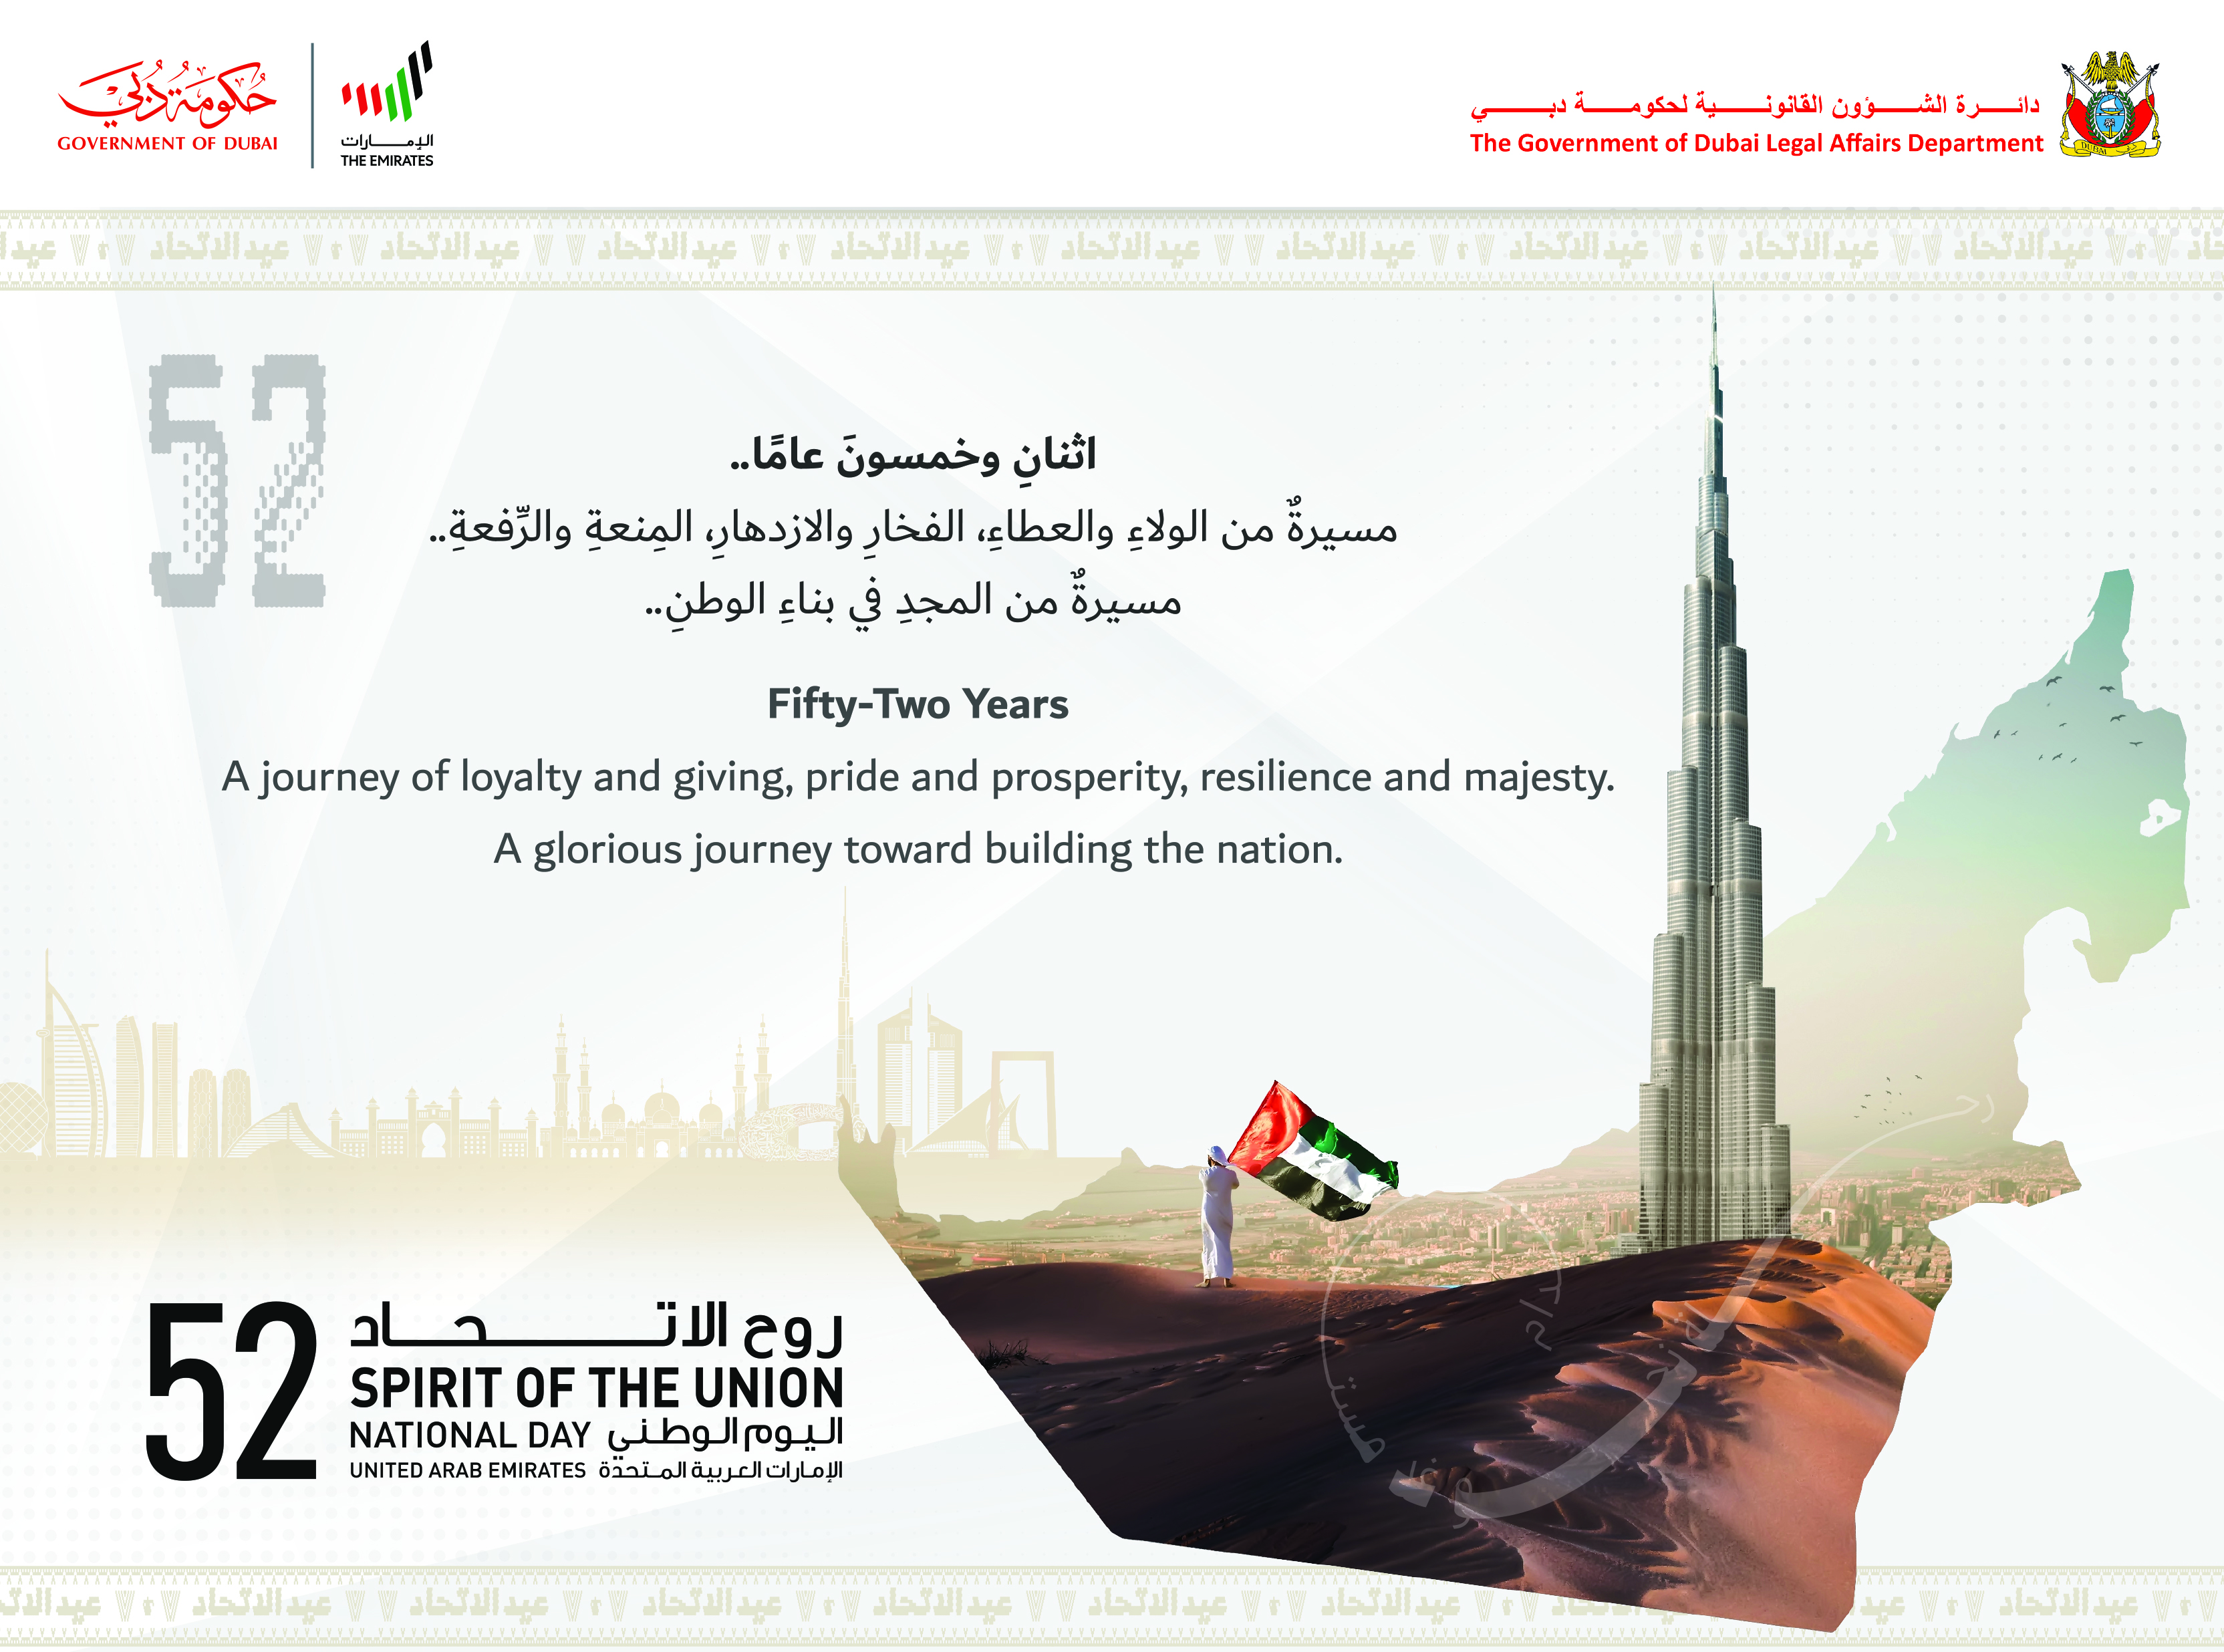 Statement of His Excellency Director General of the Government of Dubai Legal Affairs Department on the Occasion of the UAE’s 52nd National Day